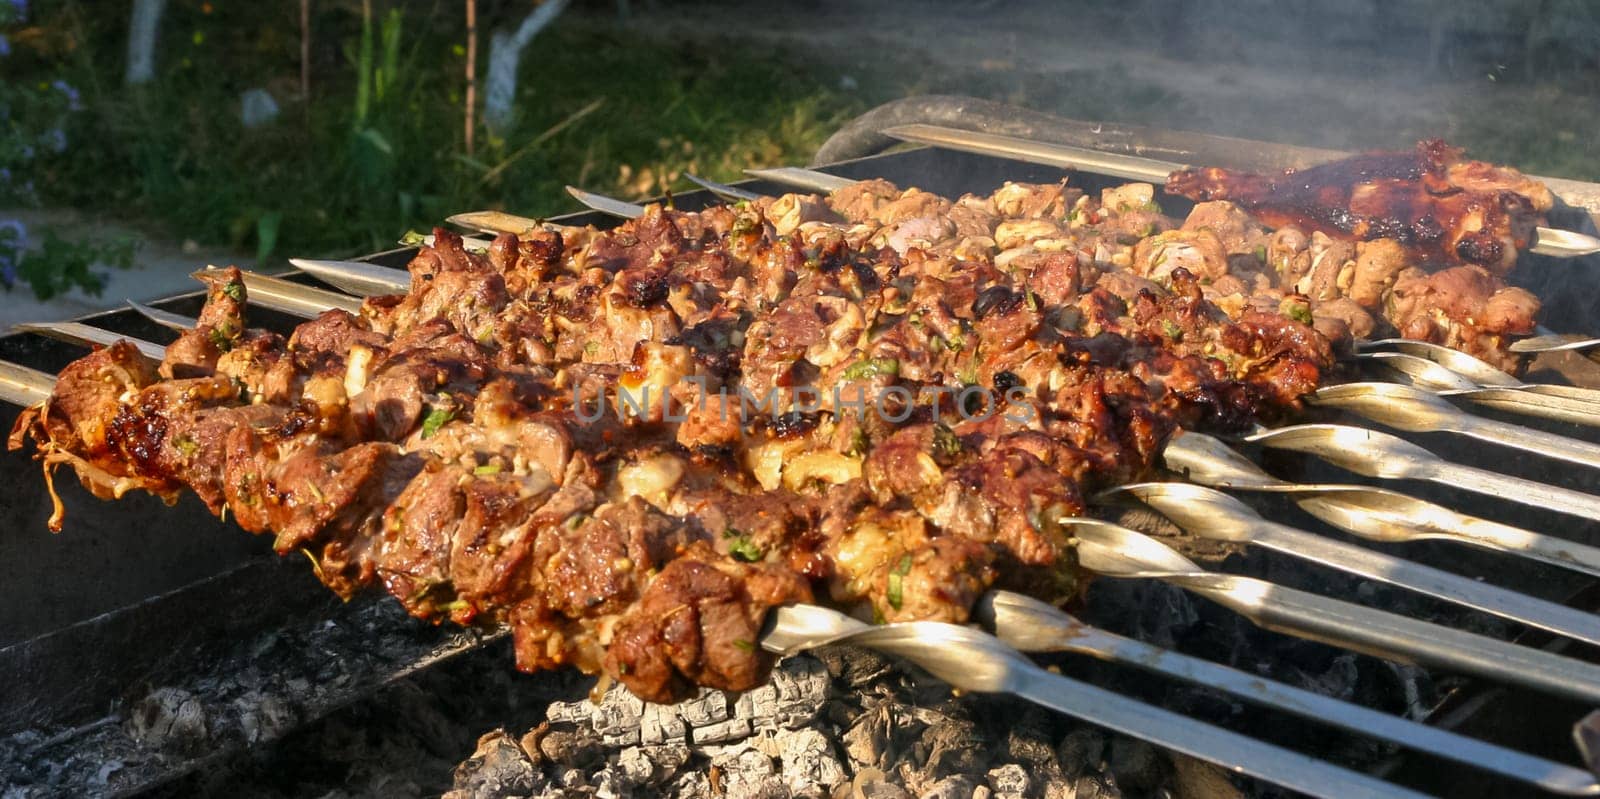 Pork Meat on skewers grilled on the grill, delicious food by Hydrobiolog